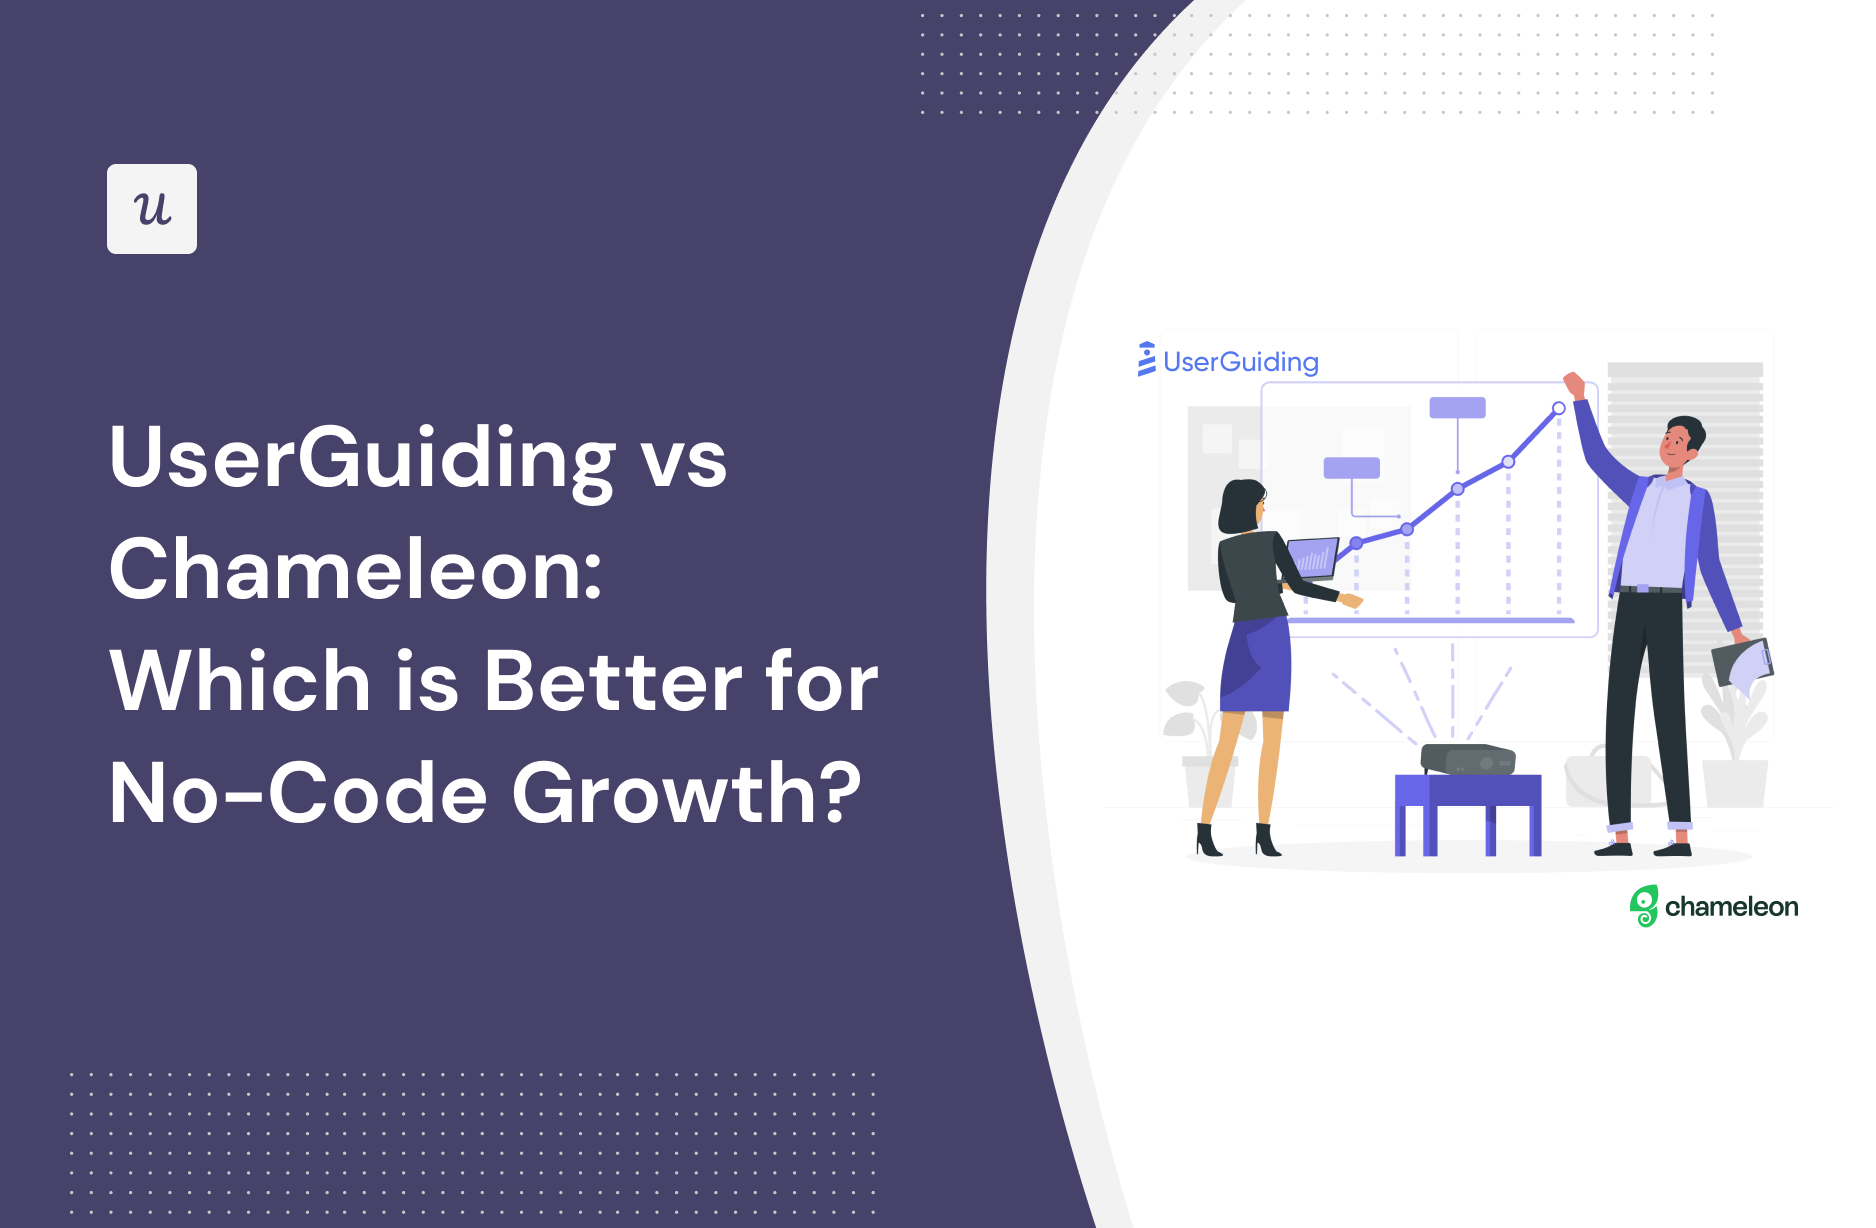 UserGuiding vs Chameleon: Which is Better for No-Code Growth?